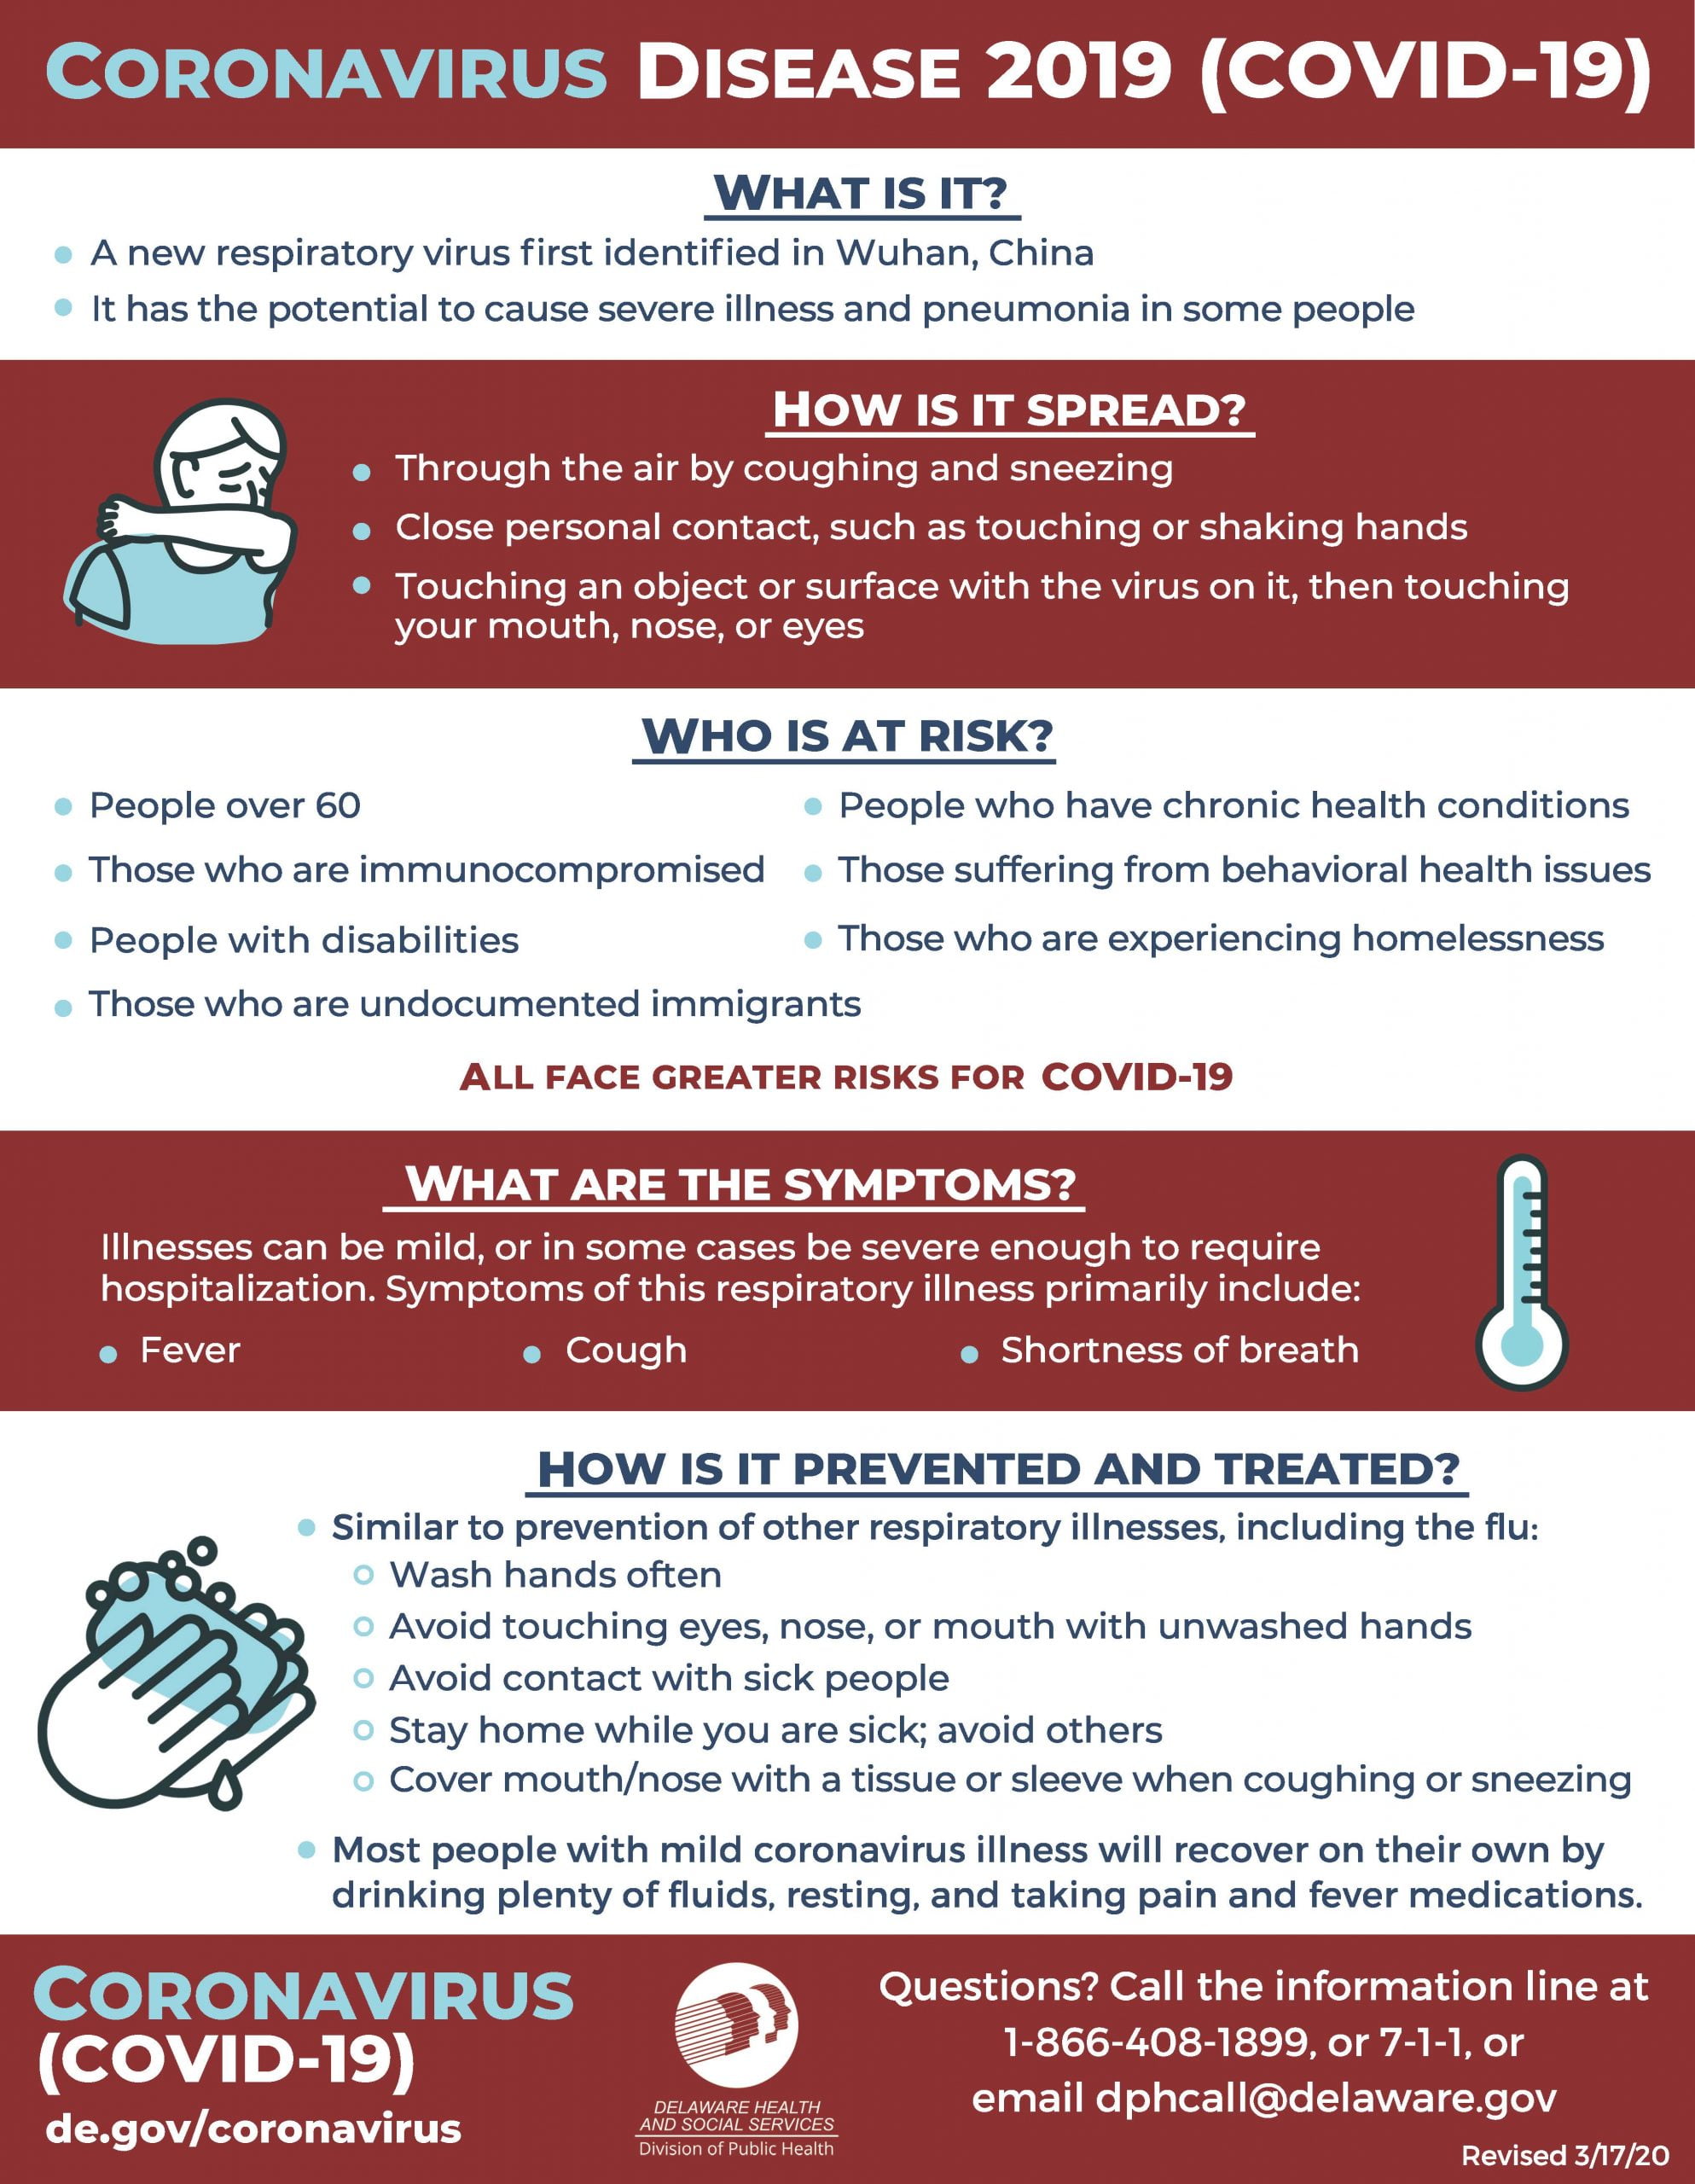 Infographic on COVID-19, its spread and and preventing and treating it by Delaware Health and Social Services.